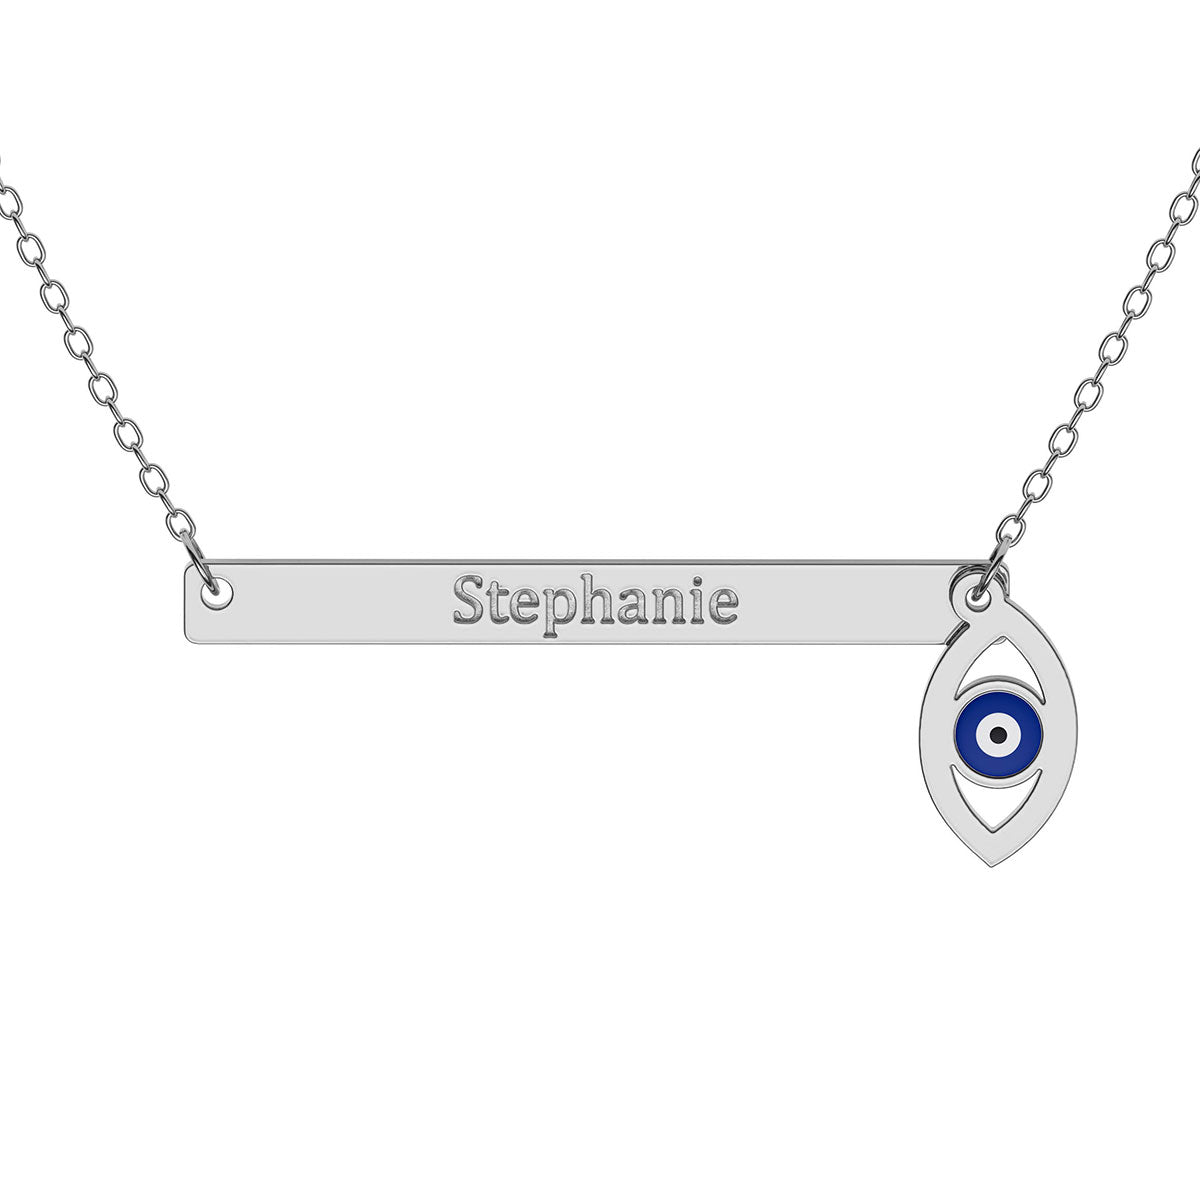 Narrow Horizontal Bar Necklace with Engraving and Evil Eye Charm